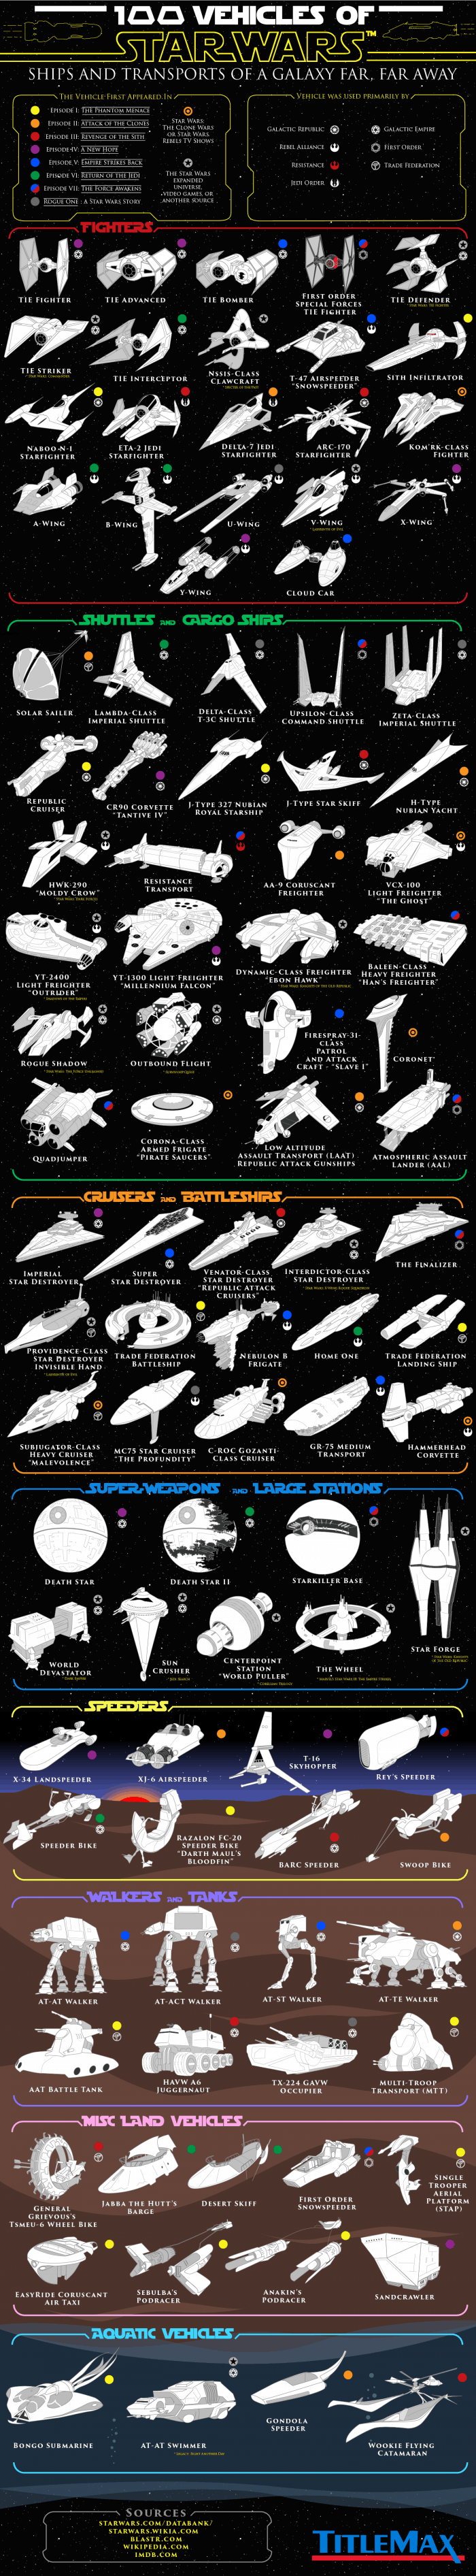 Infographic showing vehicles and spaceships in the Star Wars Universe.